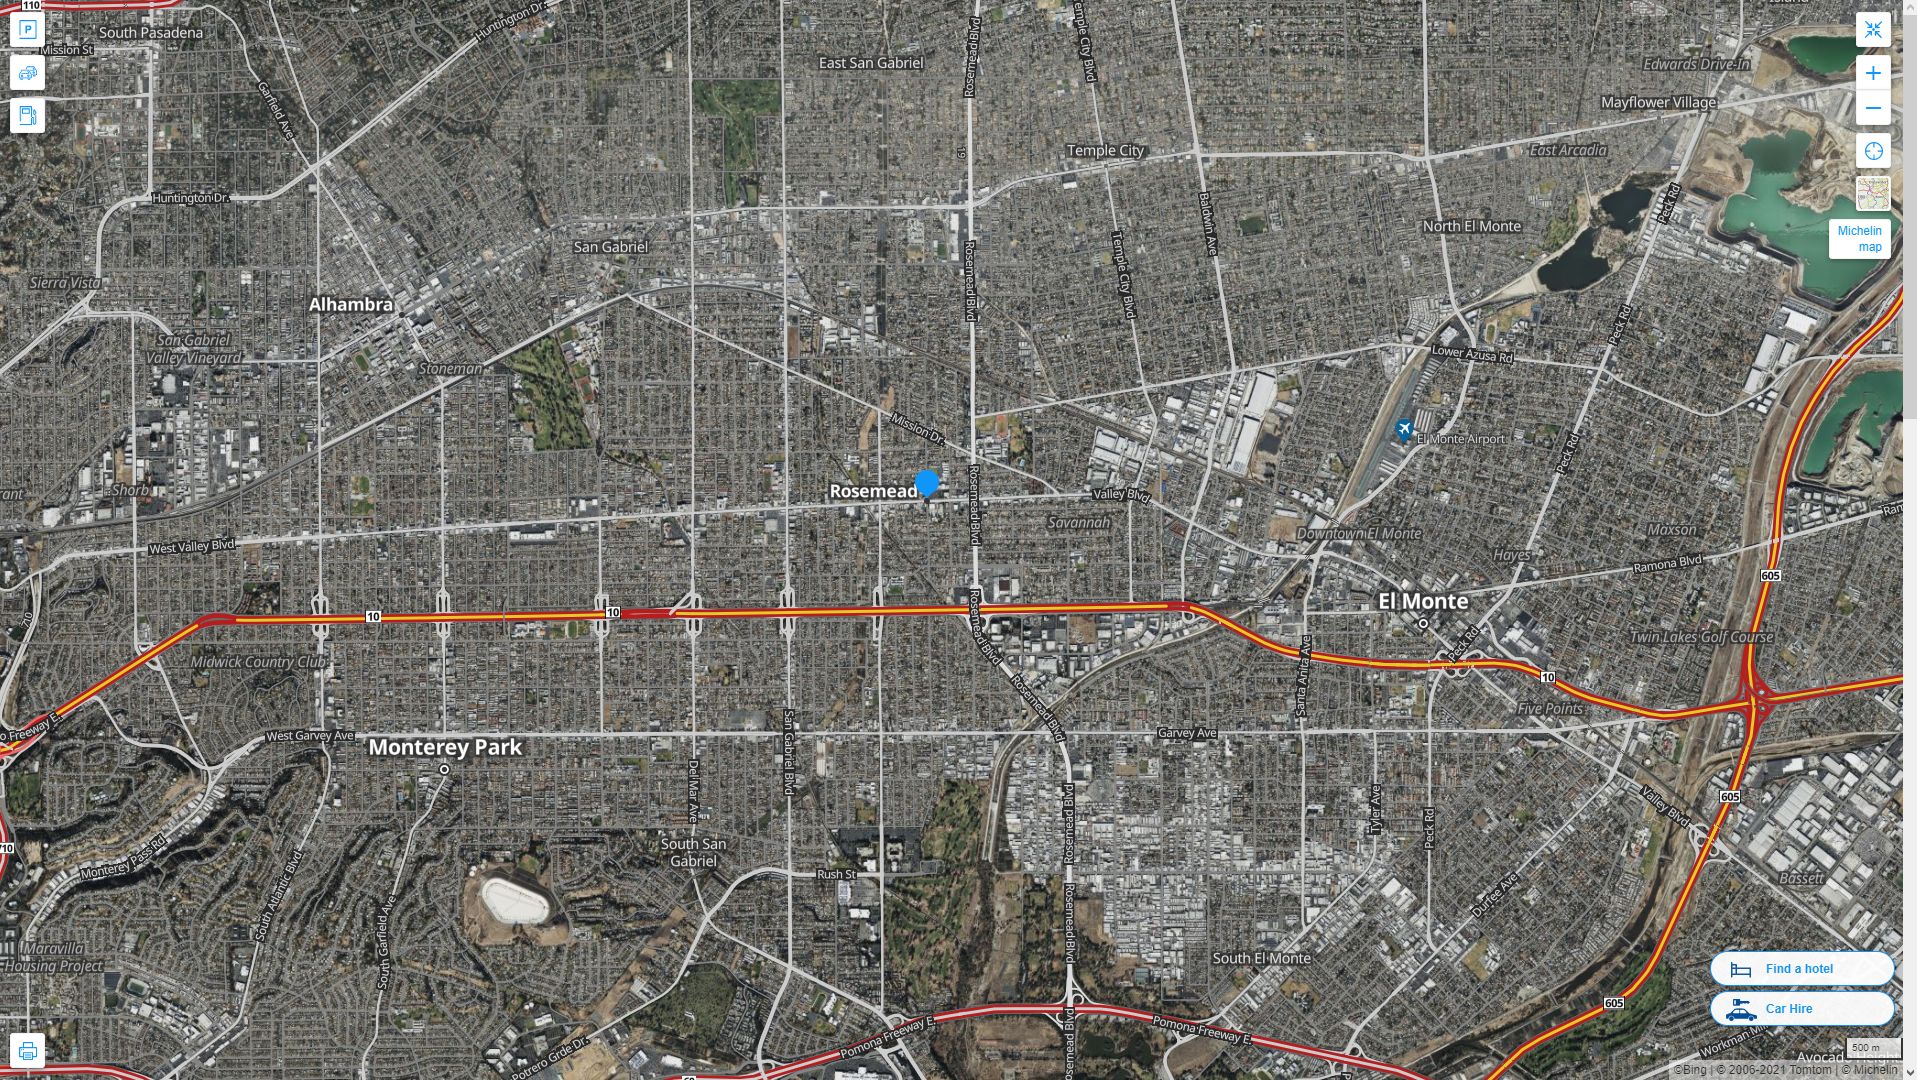 Rosemead California Highway and Road Map with Satellite View